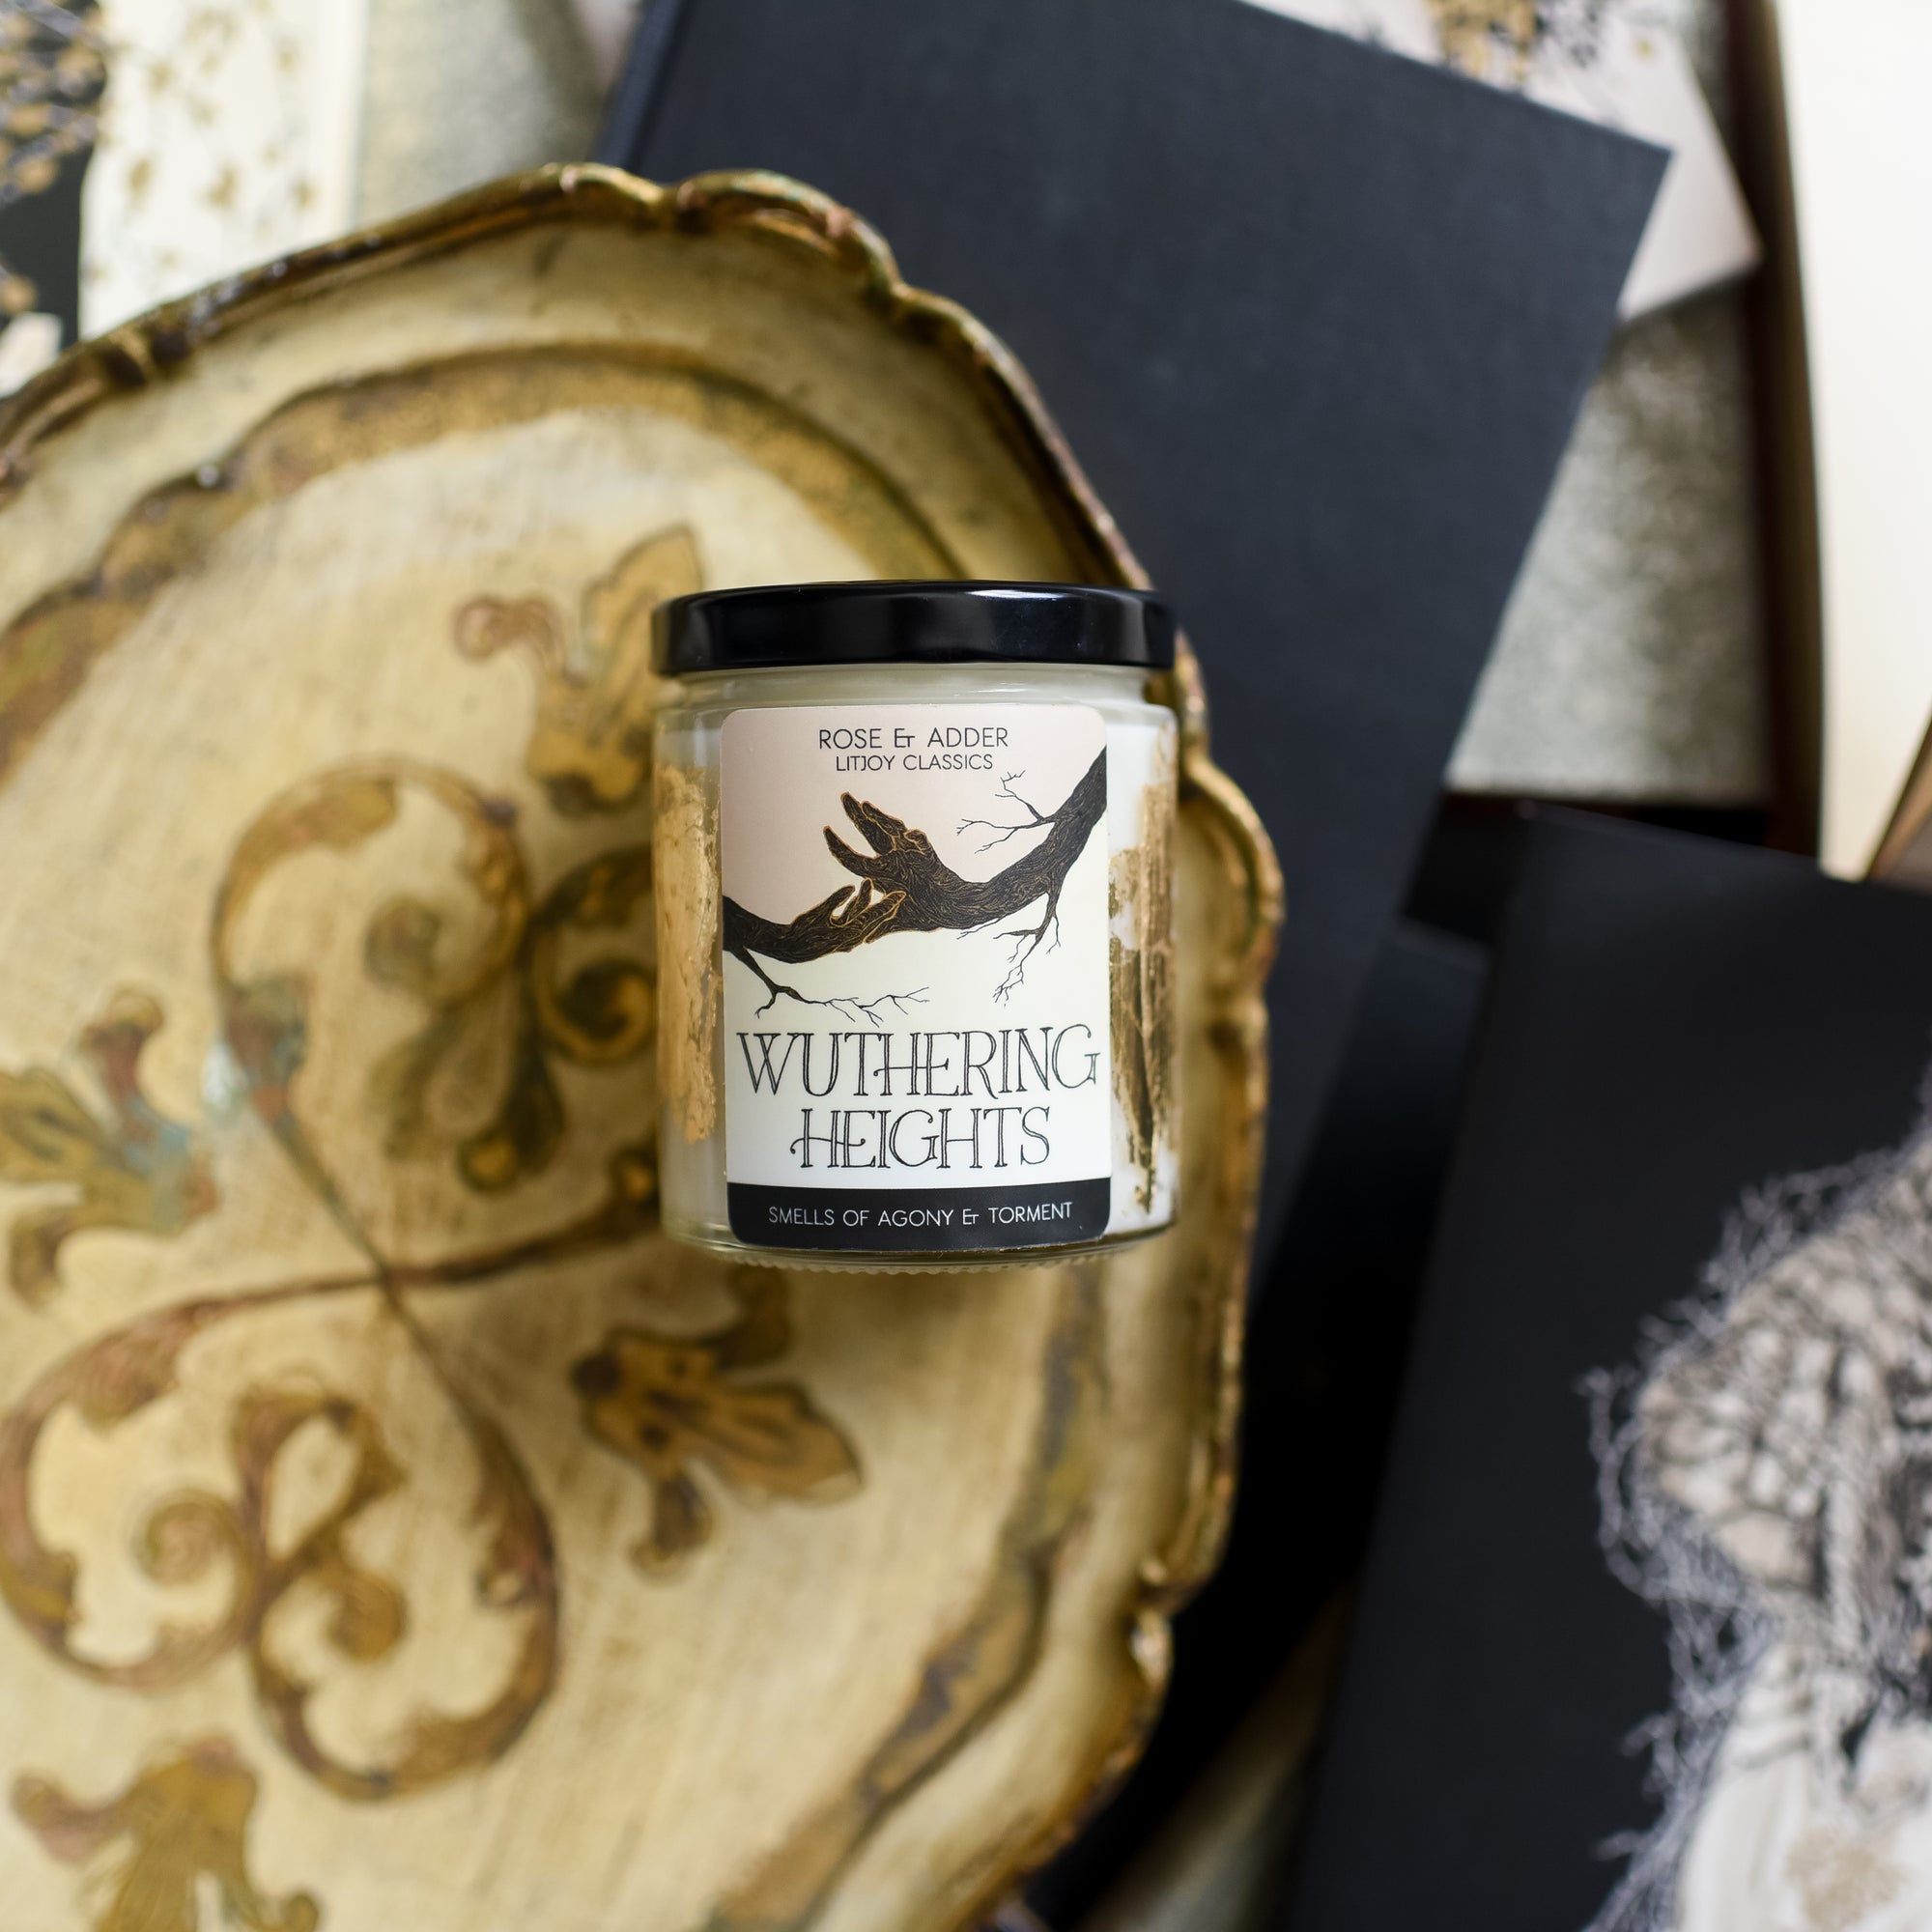 CANDLE - Wuthering Heights from LitJoy Crate | Collectibles & Gifts for Booklovers